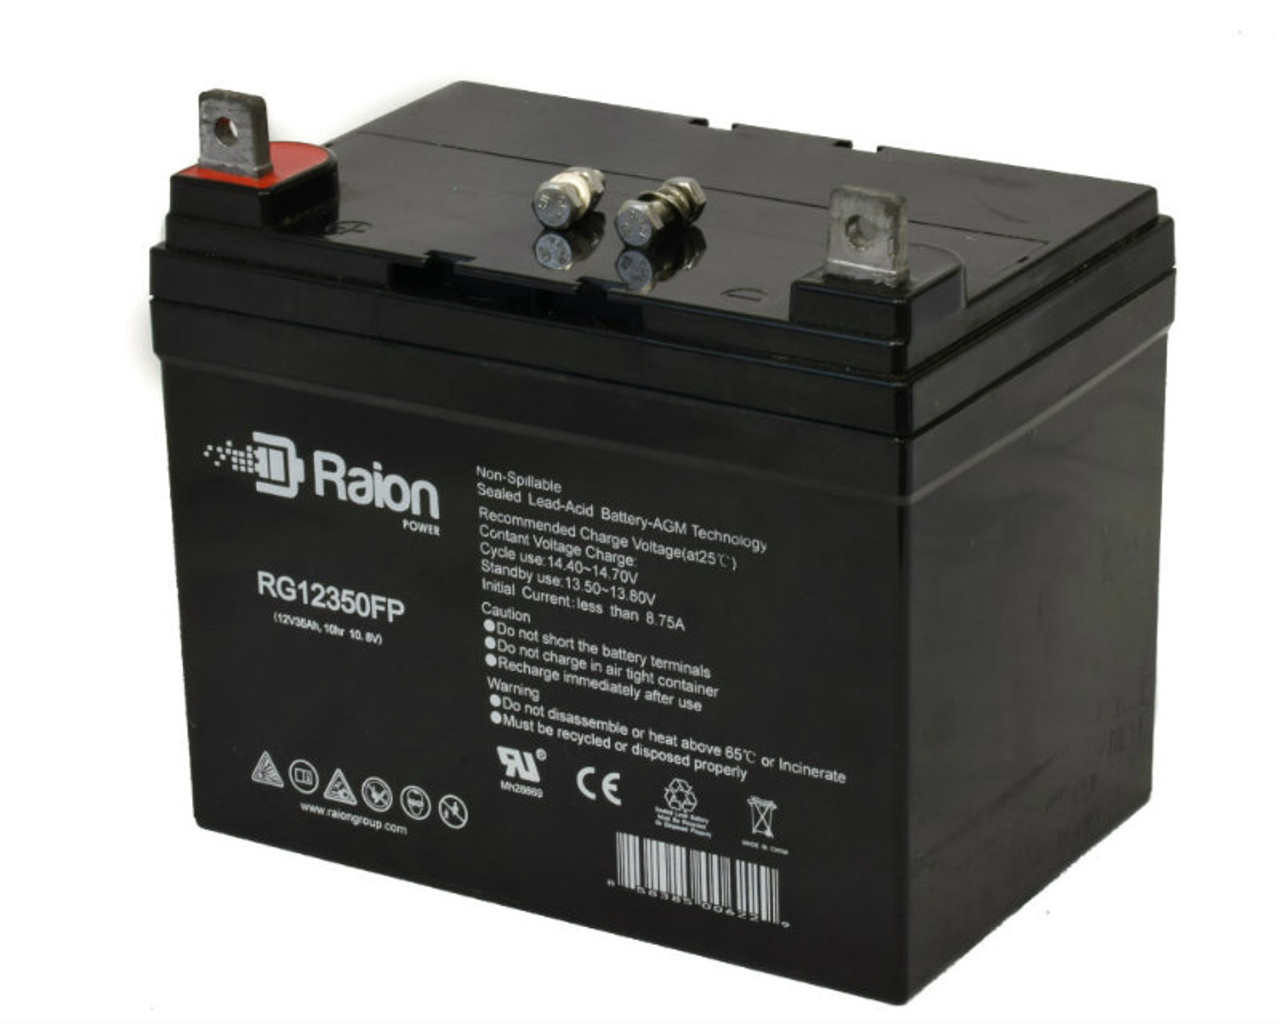 Raion Power Replacement 12V 35Ah RG12350FP Battery for Encore PROWLER PRO 61